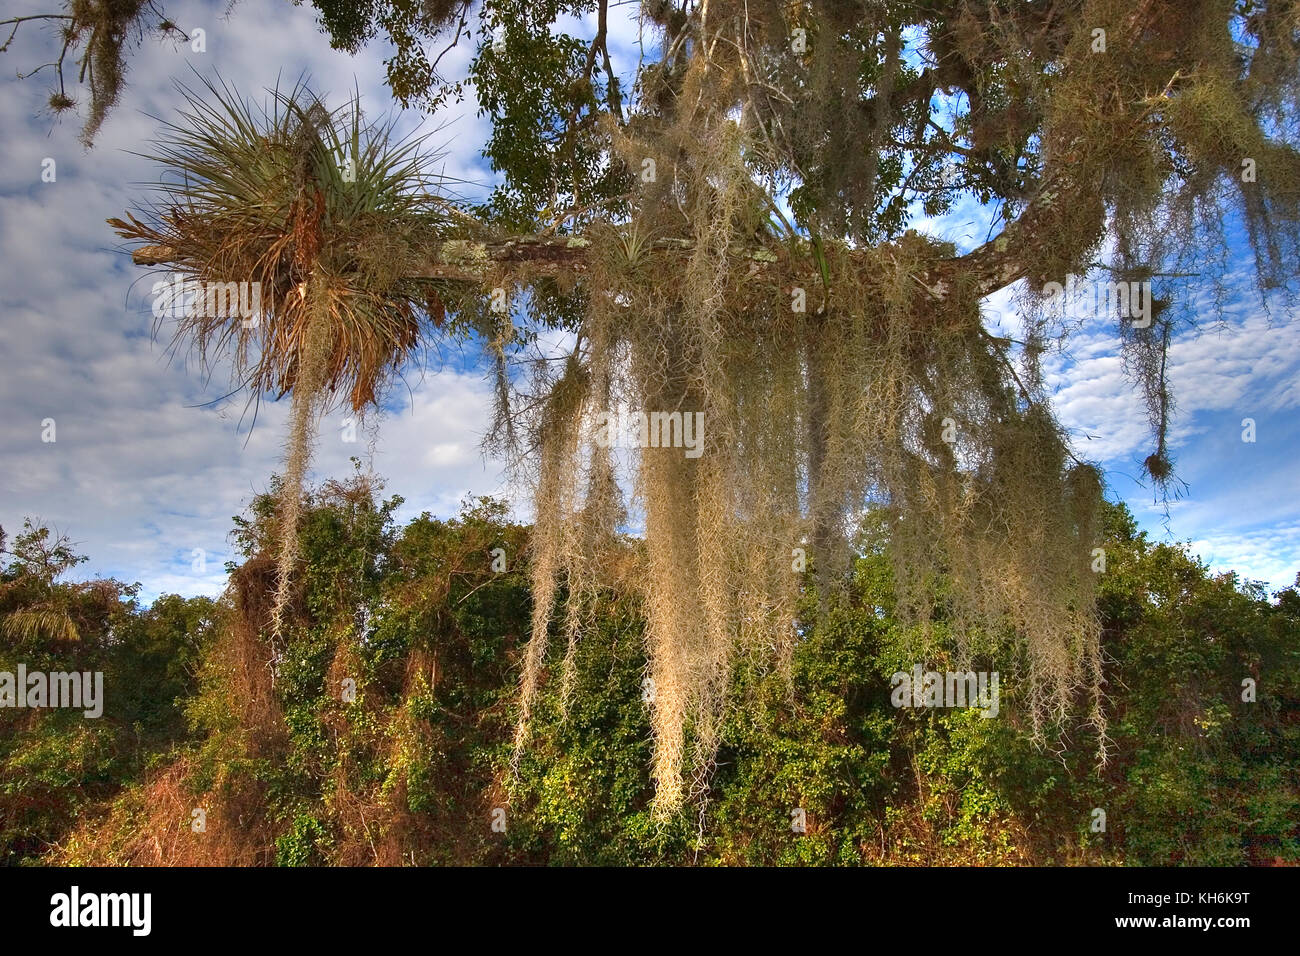 Spanish moss, Air Plant, Epiphyte, Draping